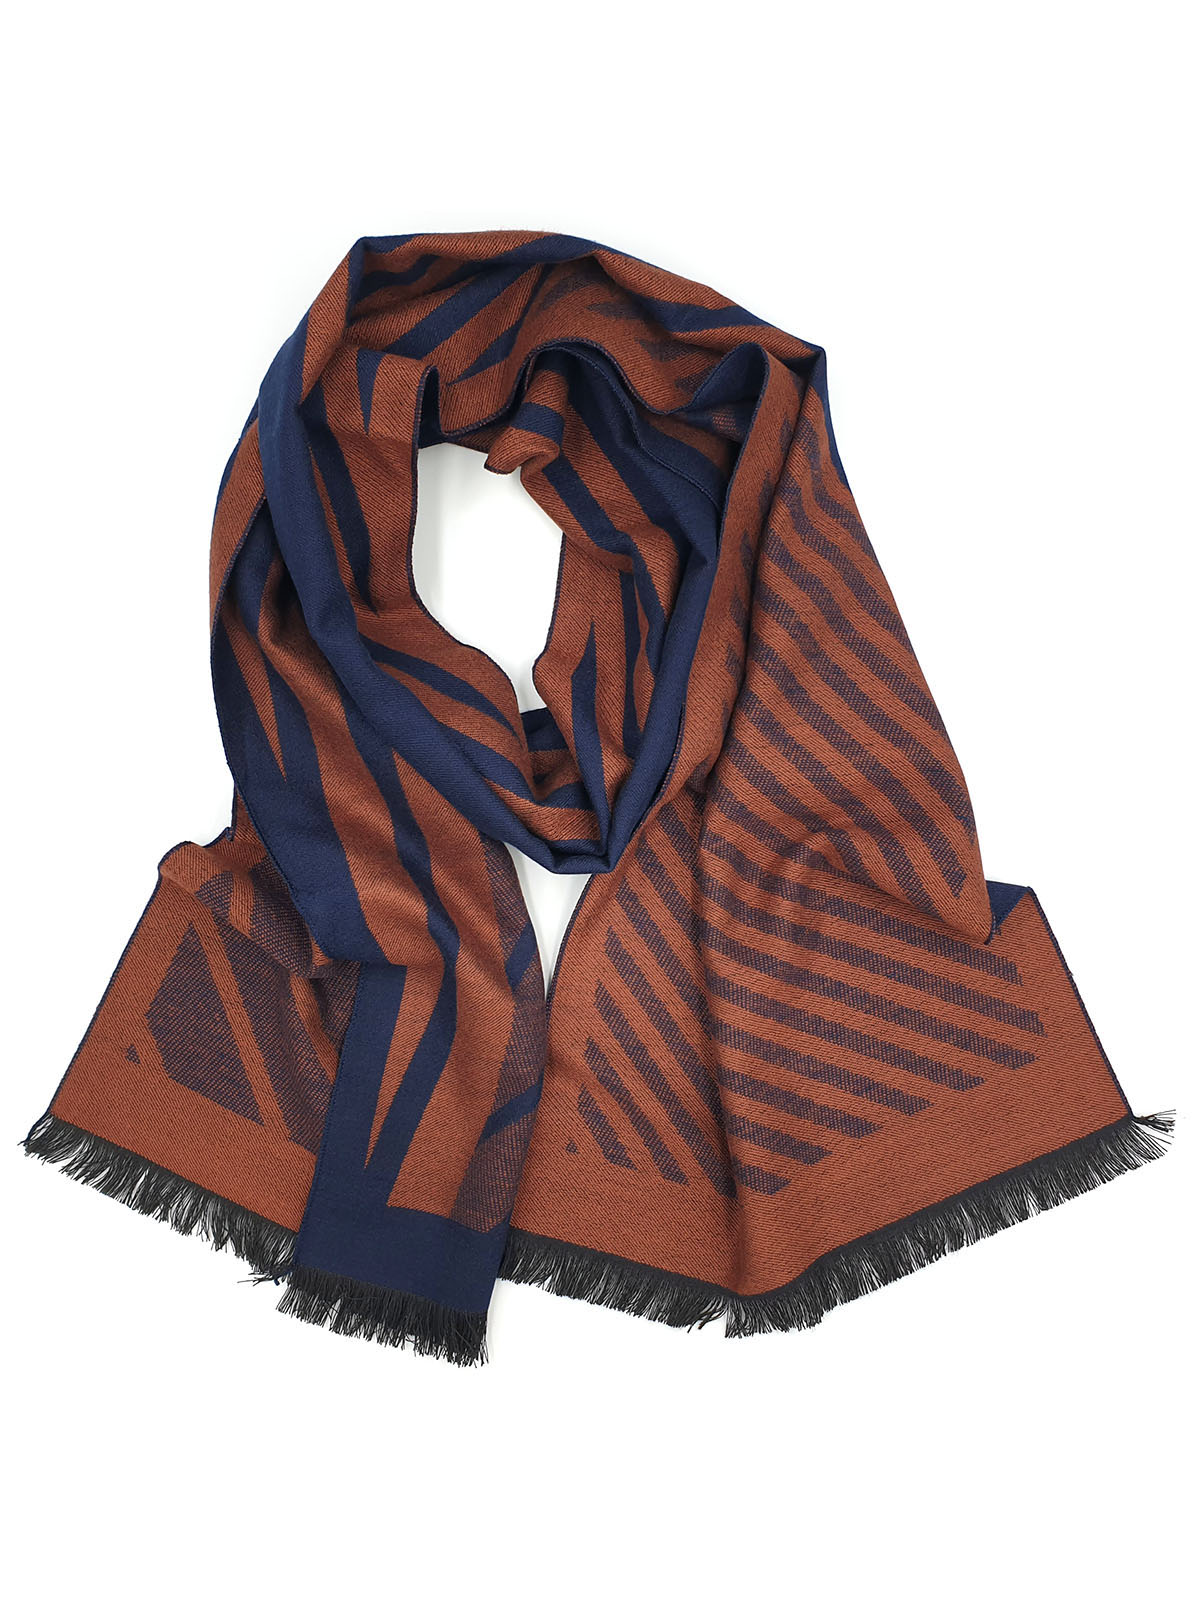 Scarf in tile and blue with fringe - 10355 - € 19.68 img3